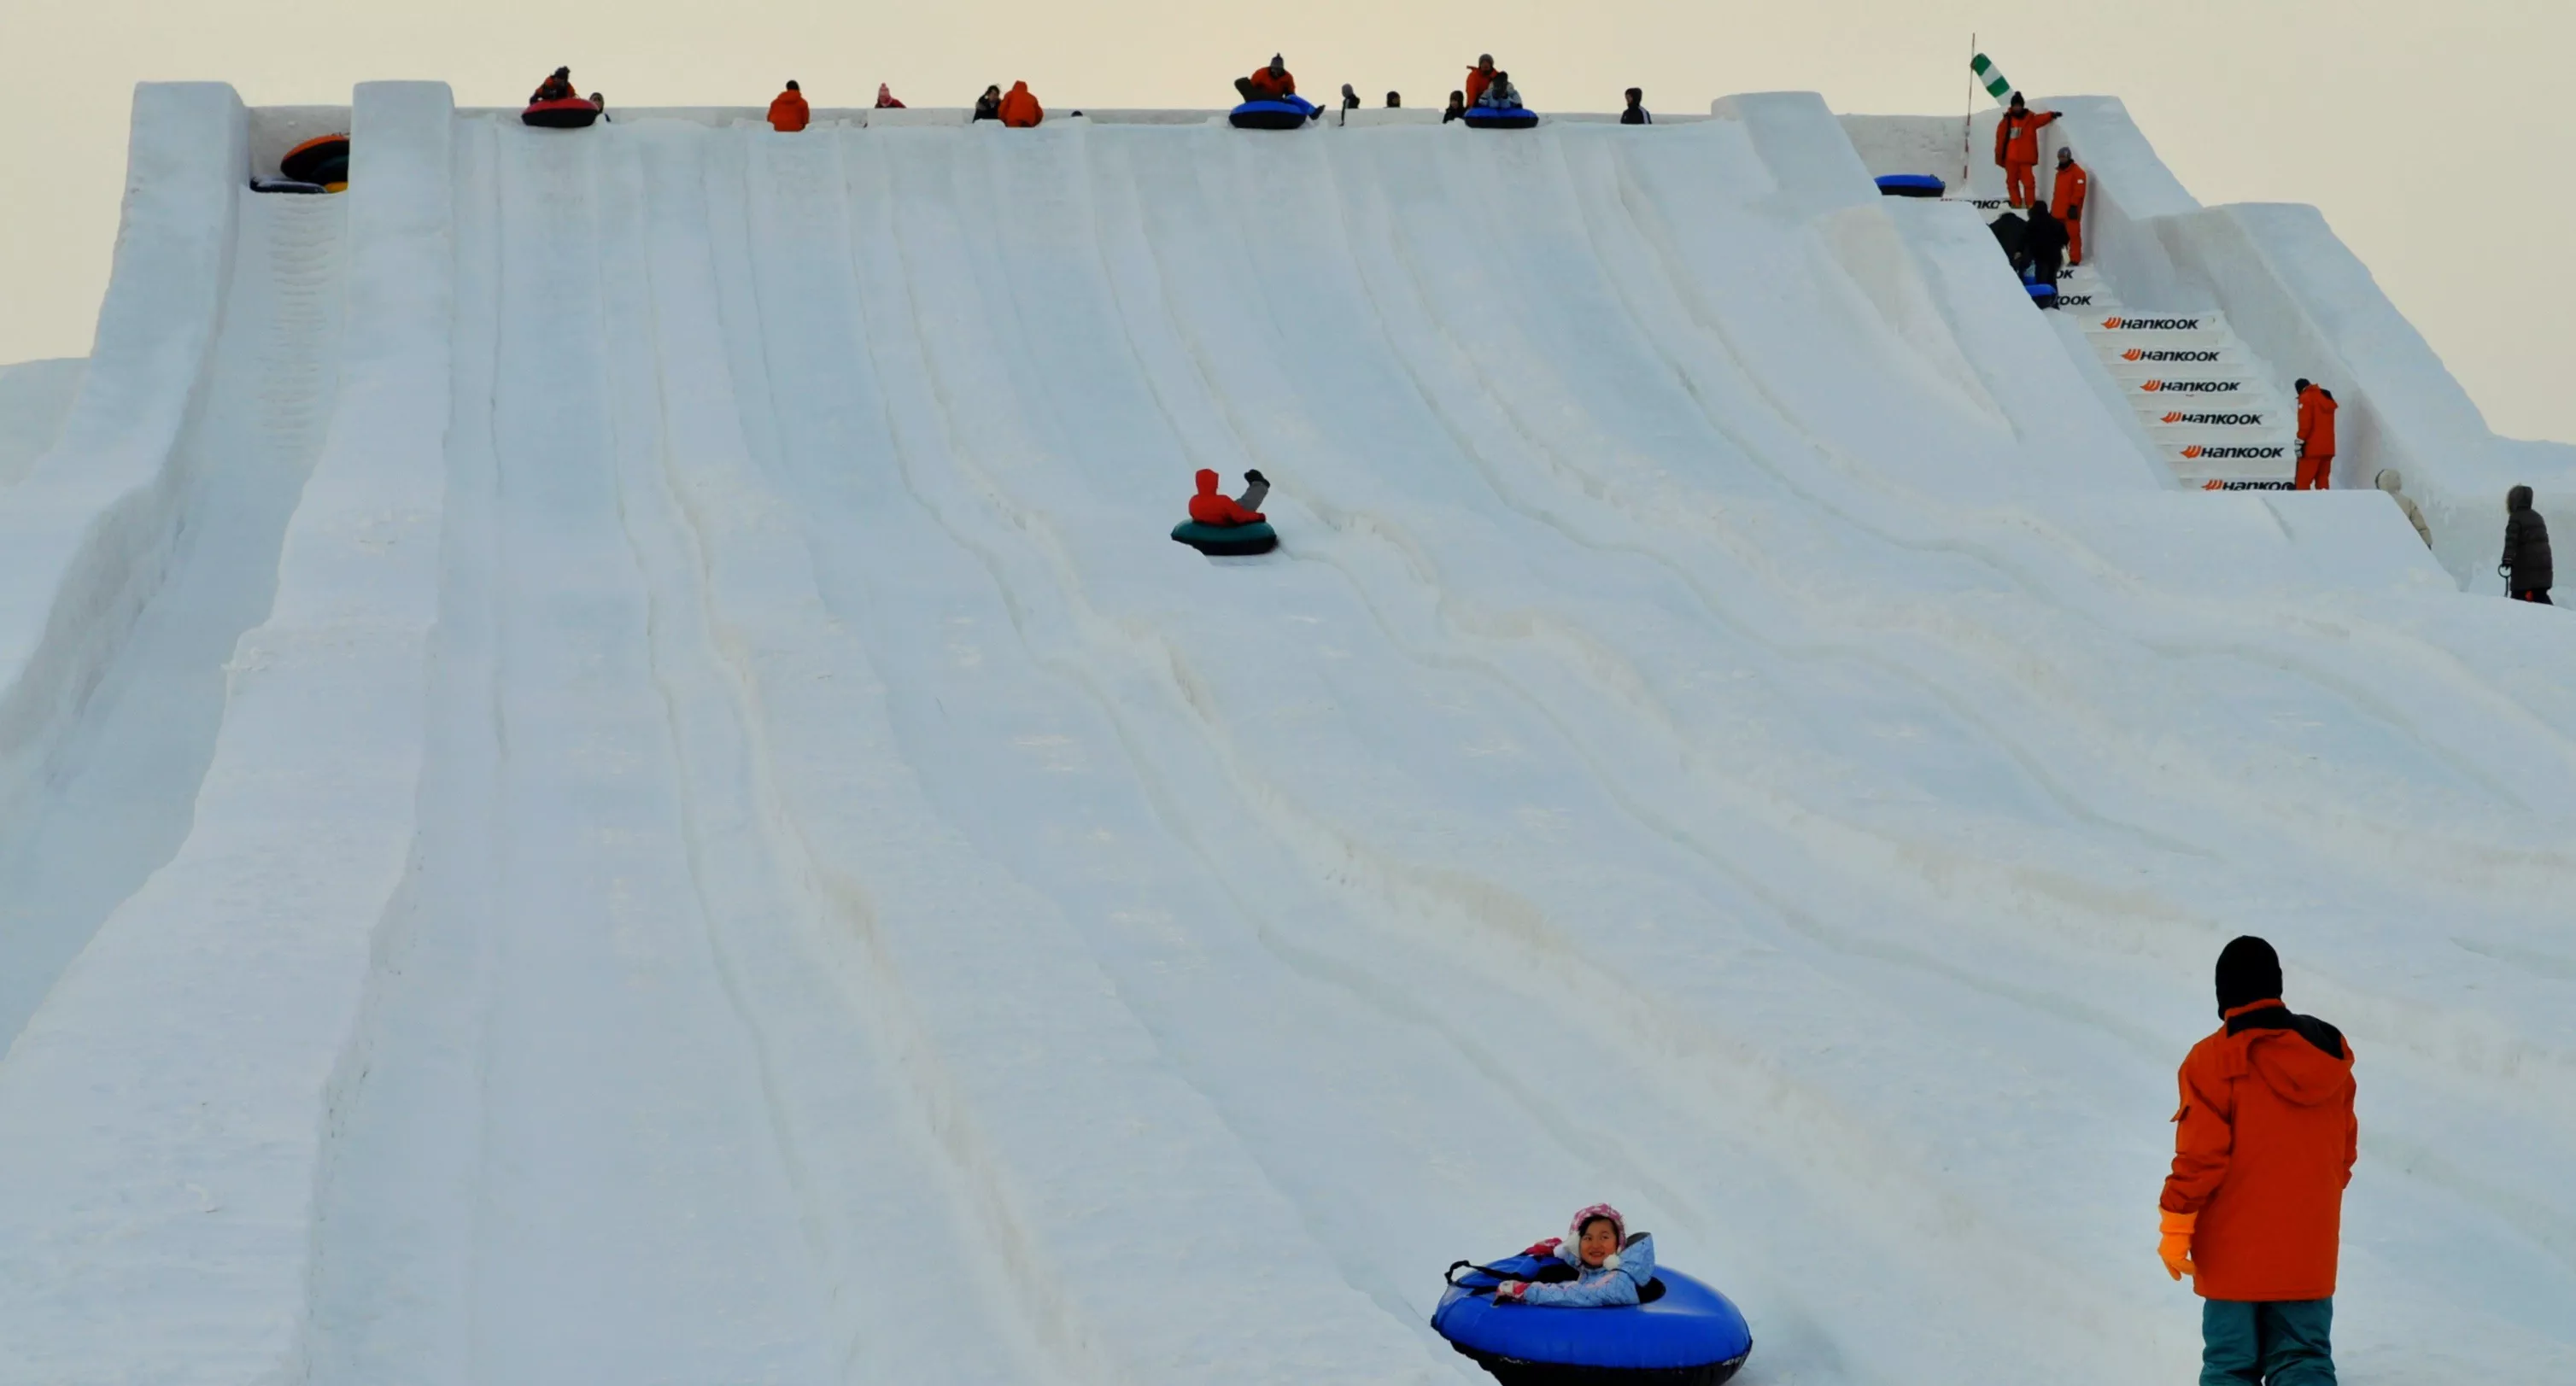 Tsudome in Japan, East Asia | Sledding - Rated 3.6